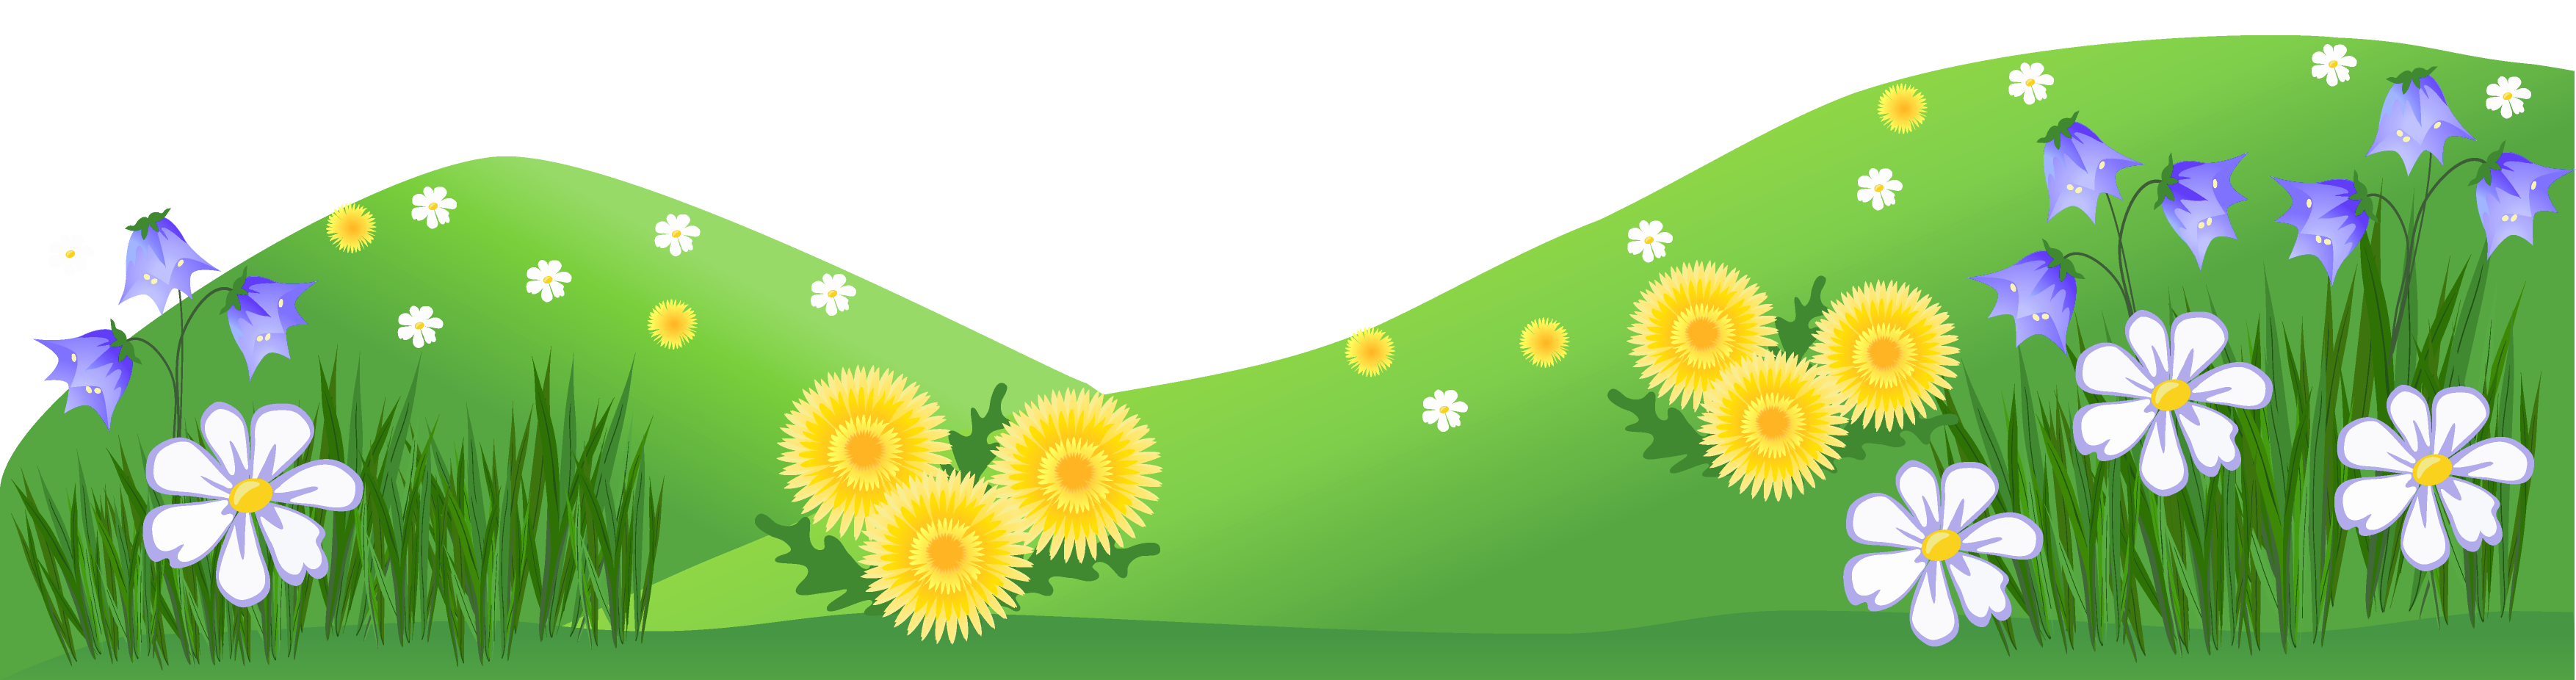 Grass ground with flowers clipart 0